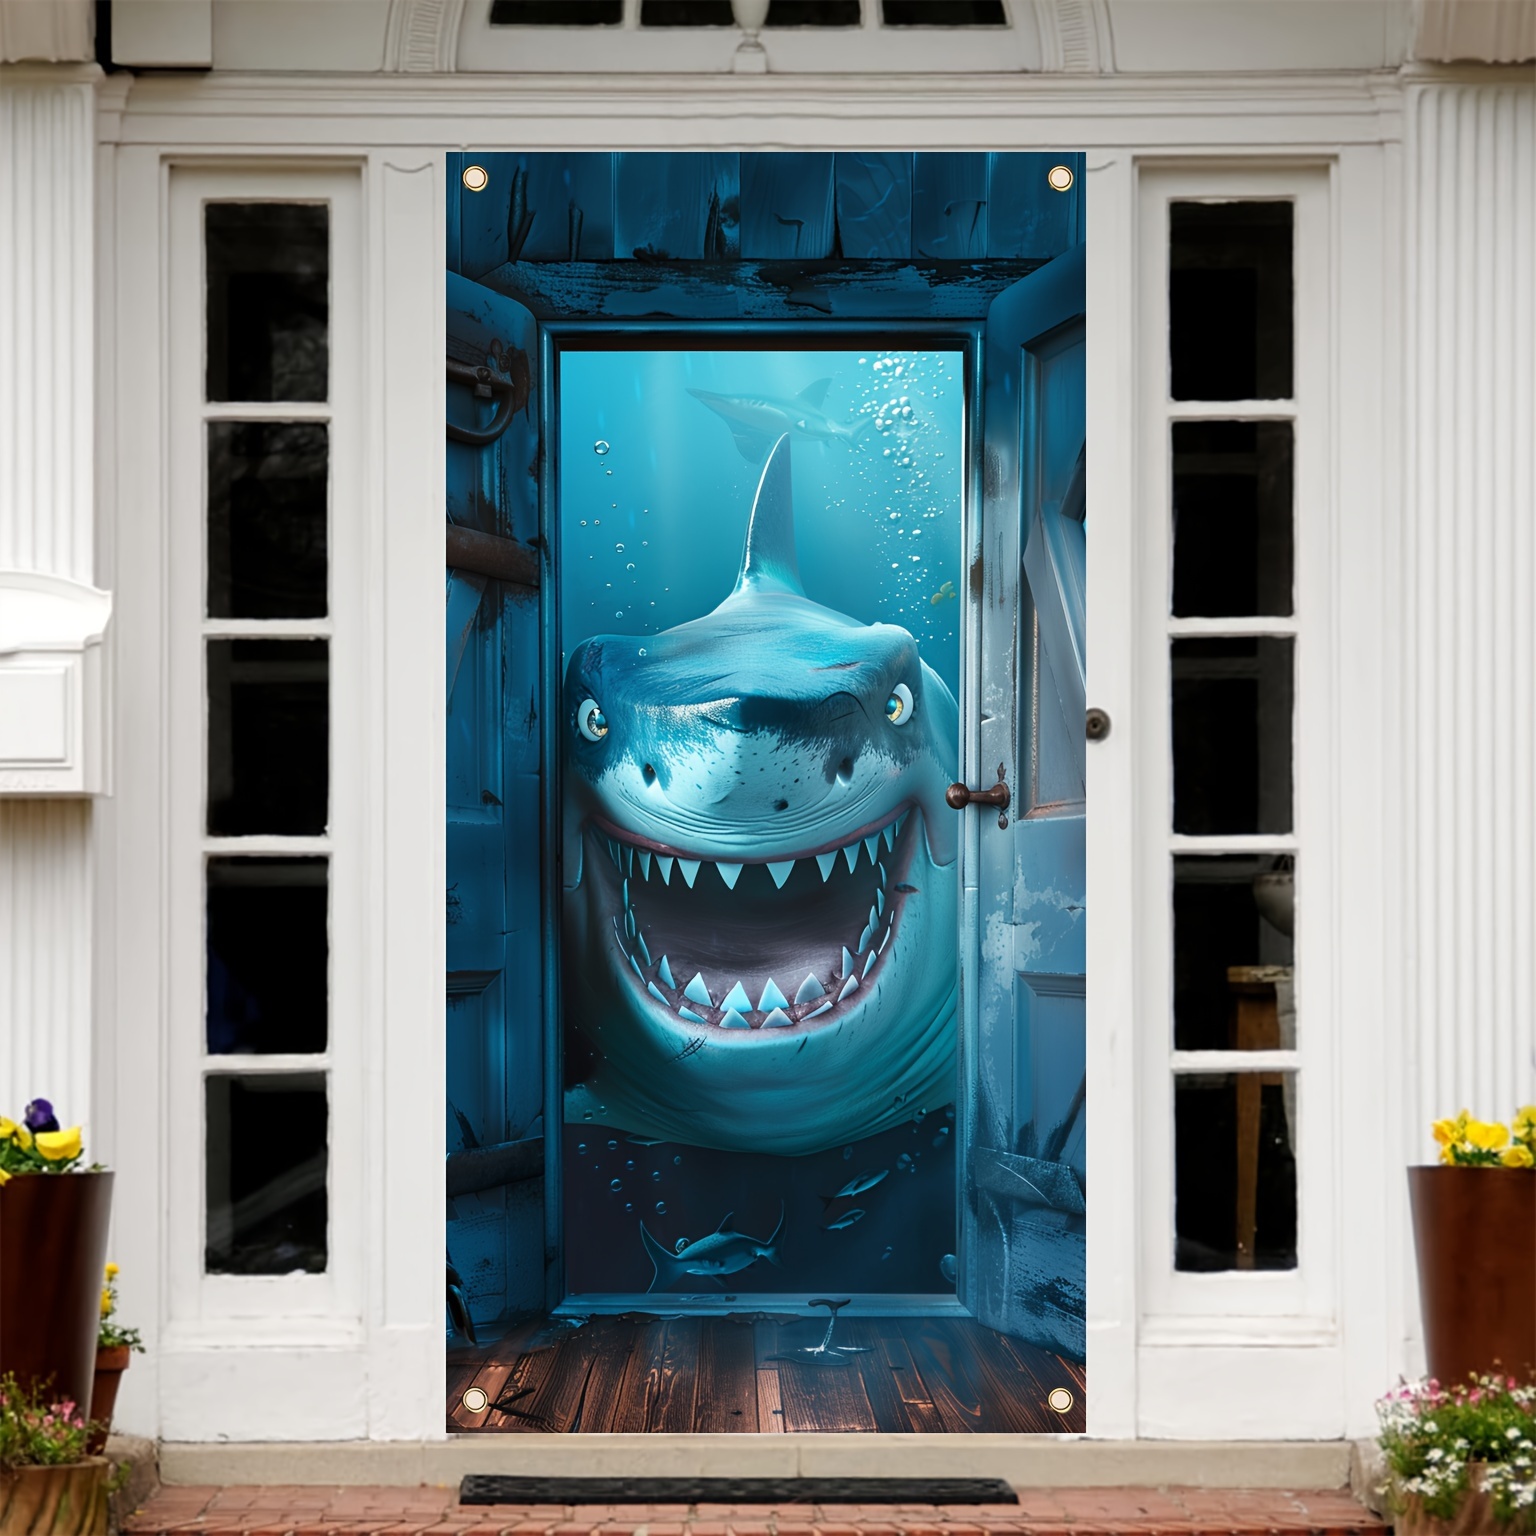 

Shark-themed Party Banner 70x35" - Underwater World Door Cover, Vinyl Photo Prop For Home Decor & Events